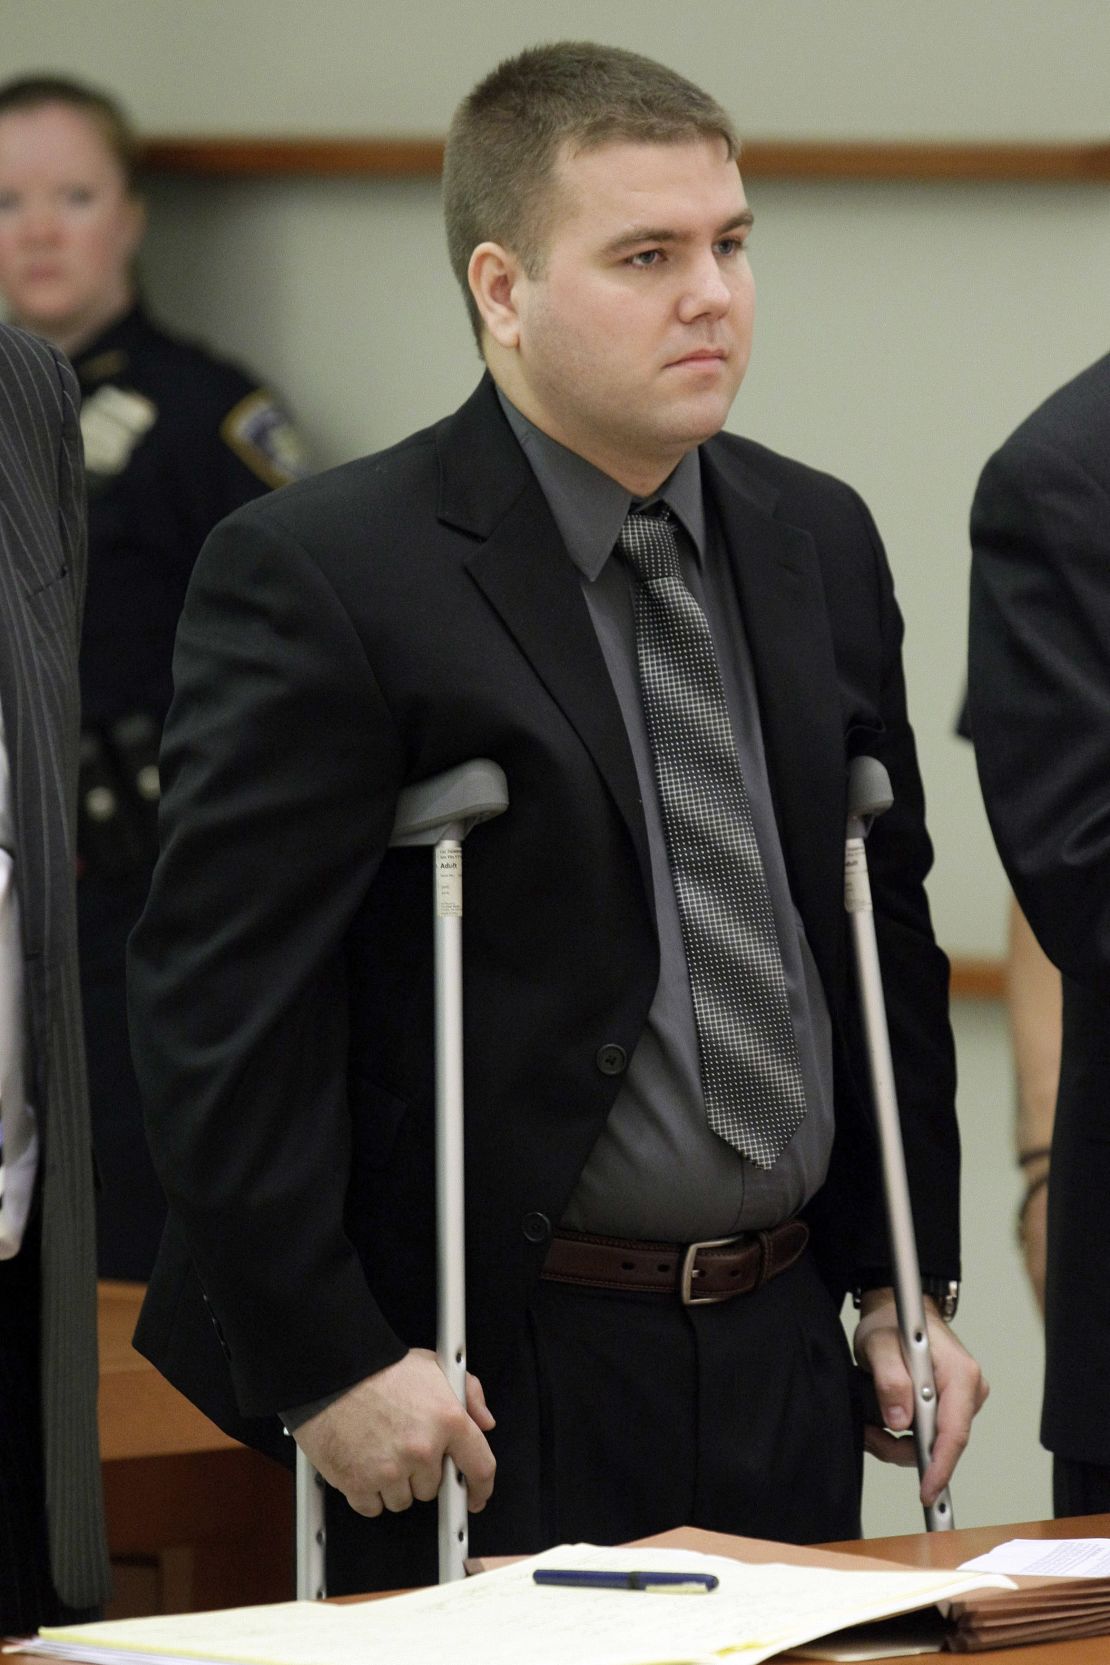 NYPD officer Richard Haste, at his arraignment for the deadly shooting of Graham in 2012.